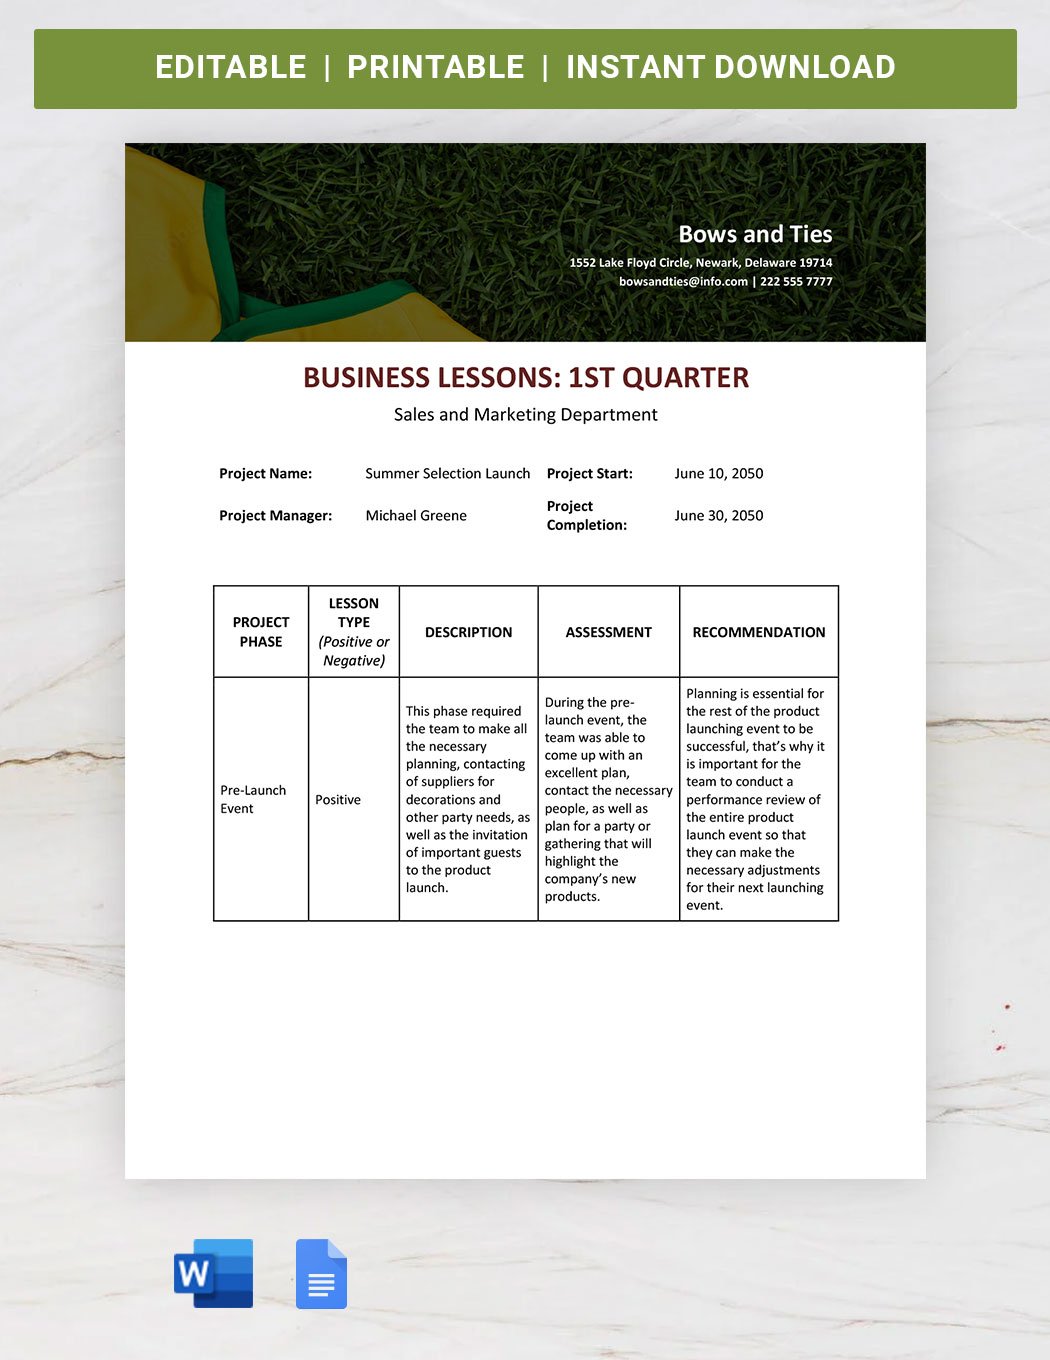 Business Lessons Learned Template in Word, Google Docs